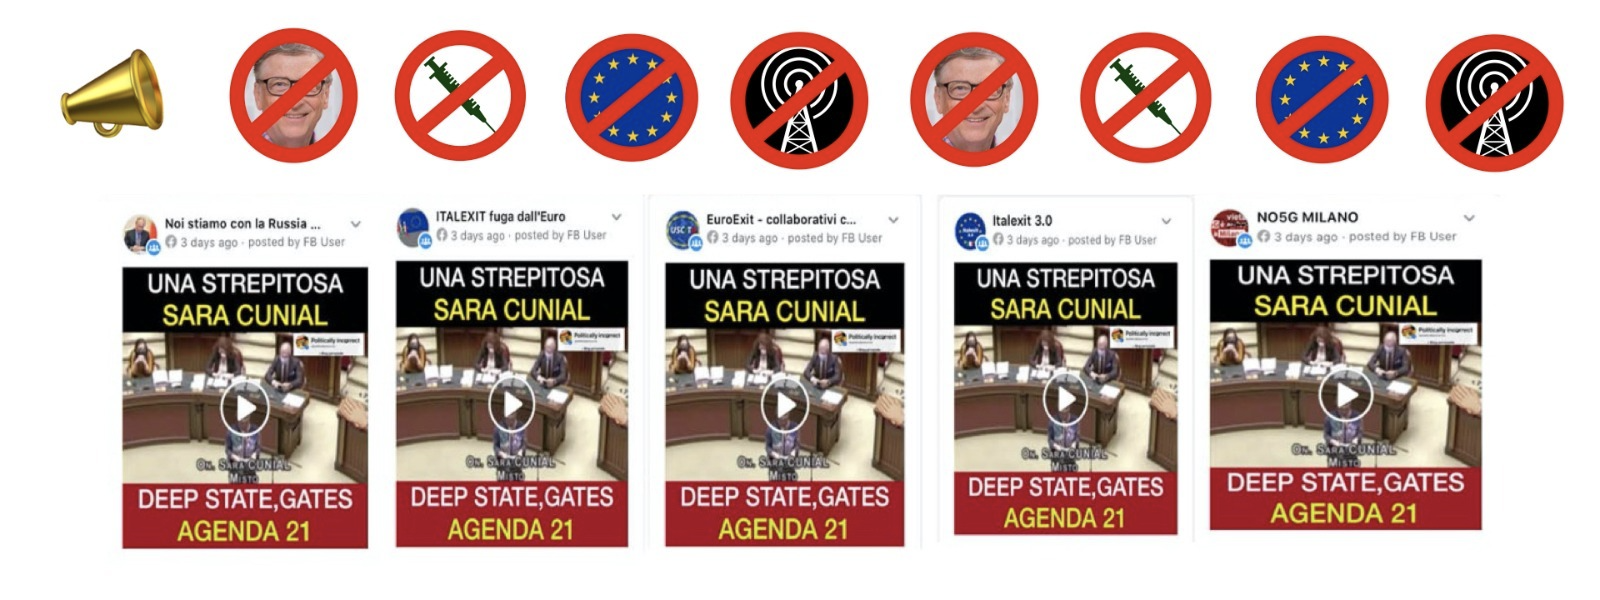 Italian MP amplifies debunked COVID-19 conspiracy theories on the floor of Parliament